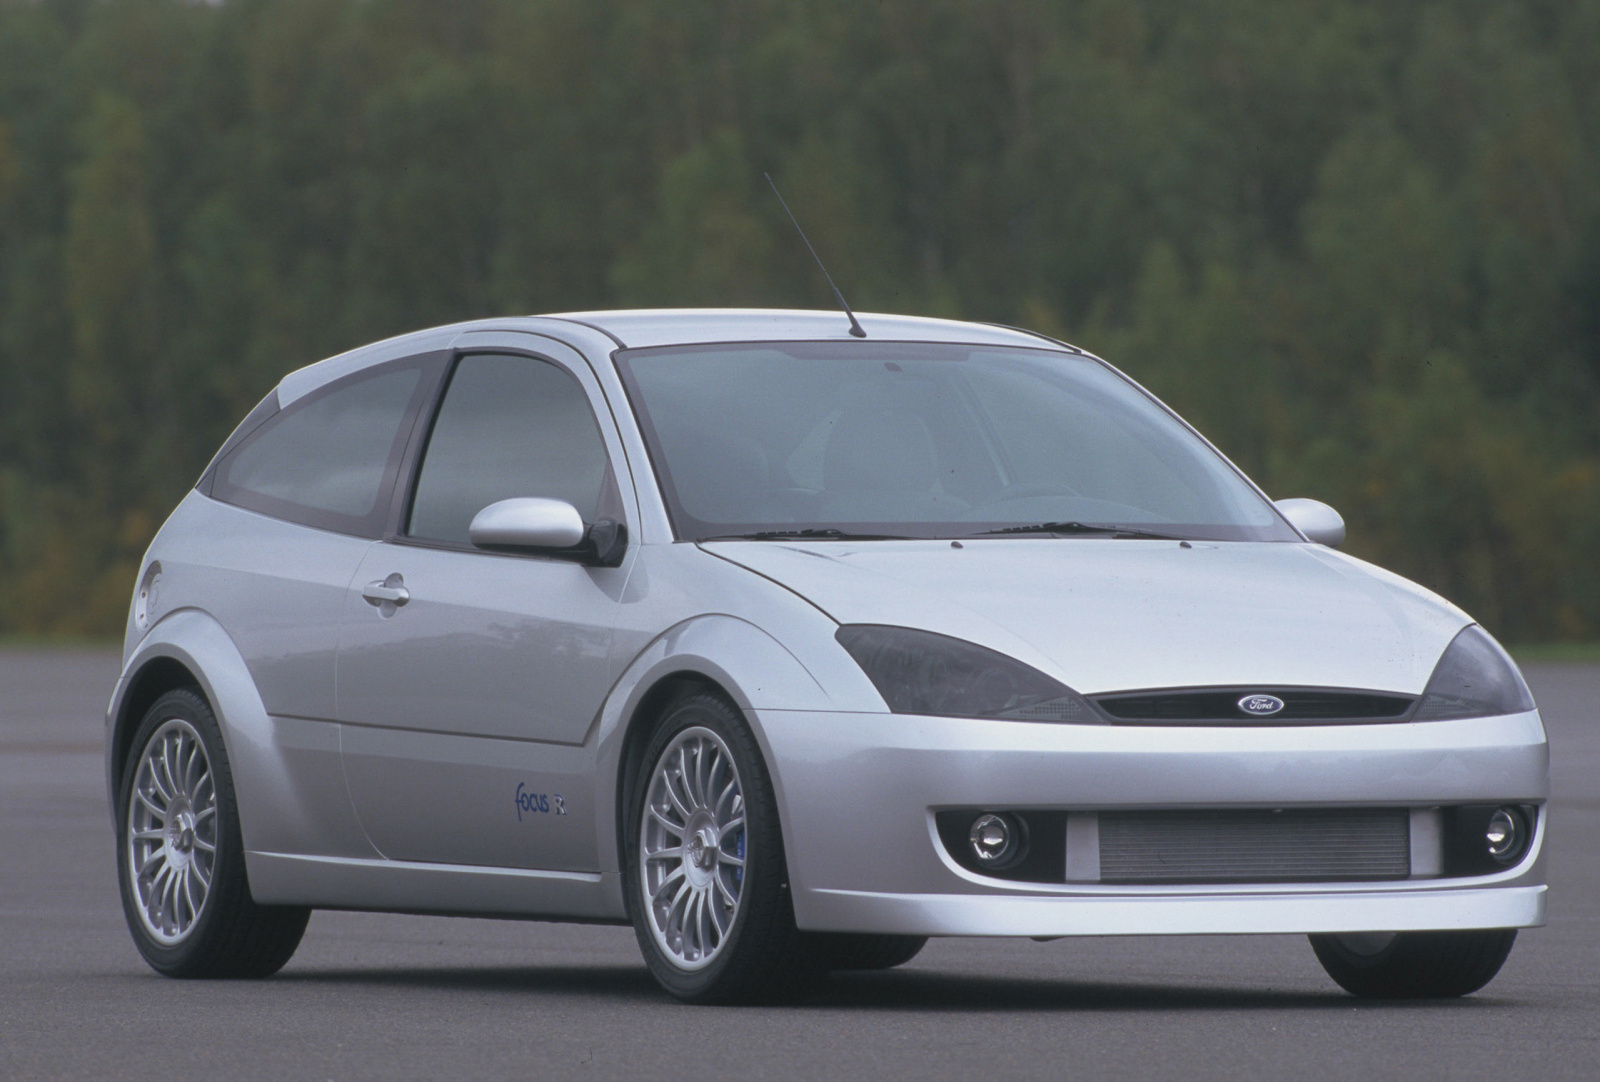 Ford Focus SVE R Concept - Foto eines Ford Concept-Cars